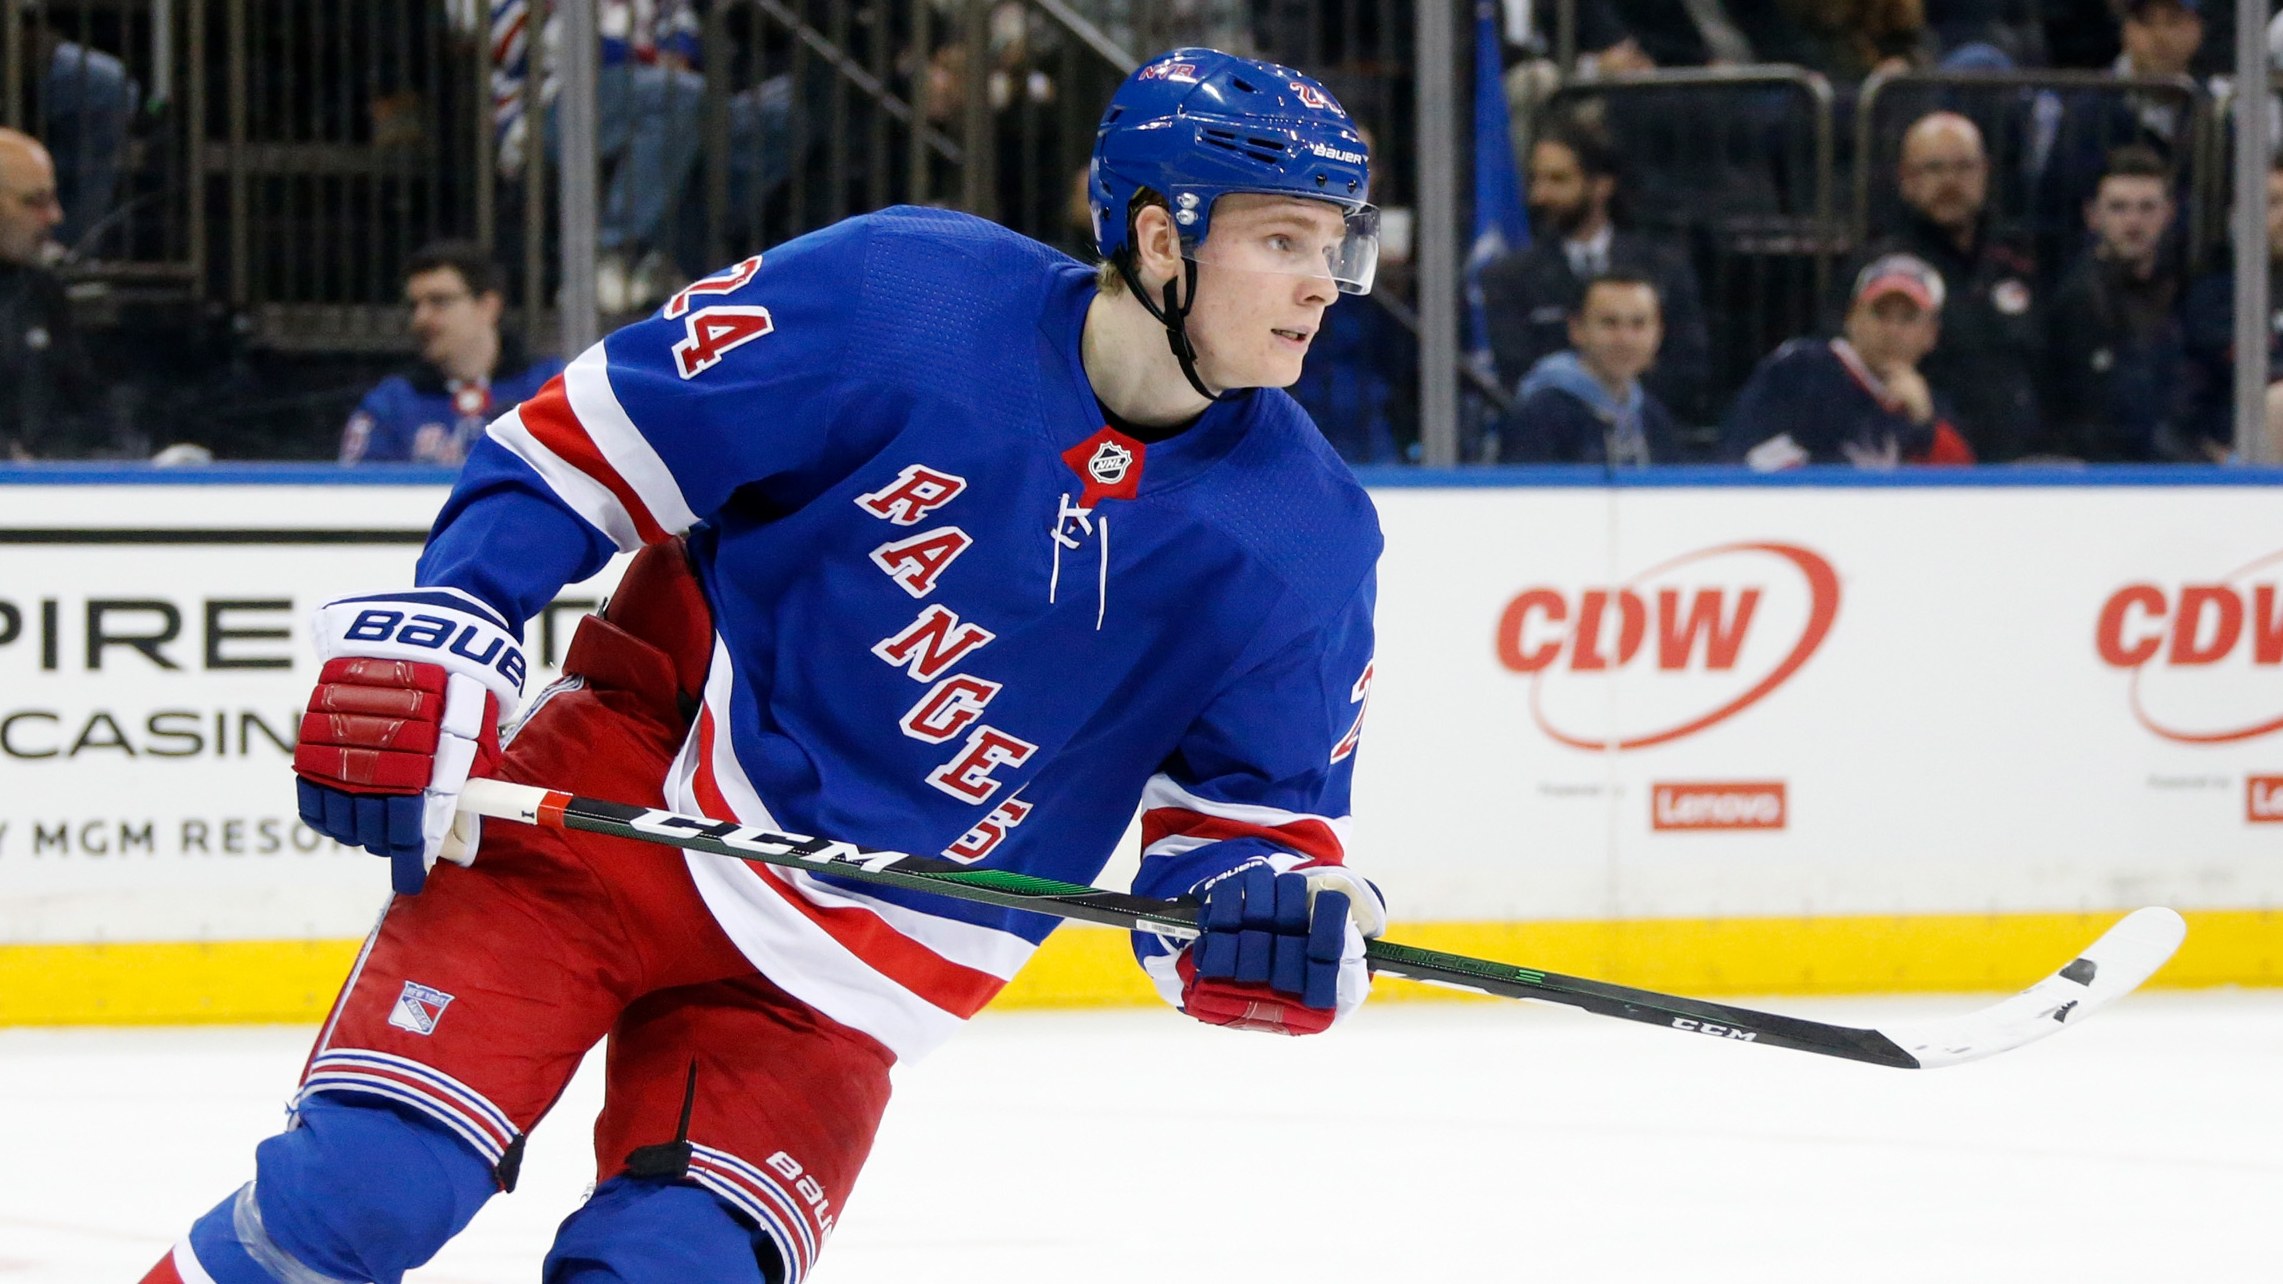 Busy times ahead for Jeff Gorton and the New York Rangers